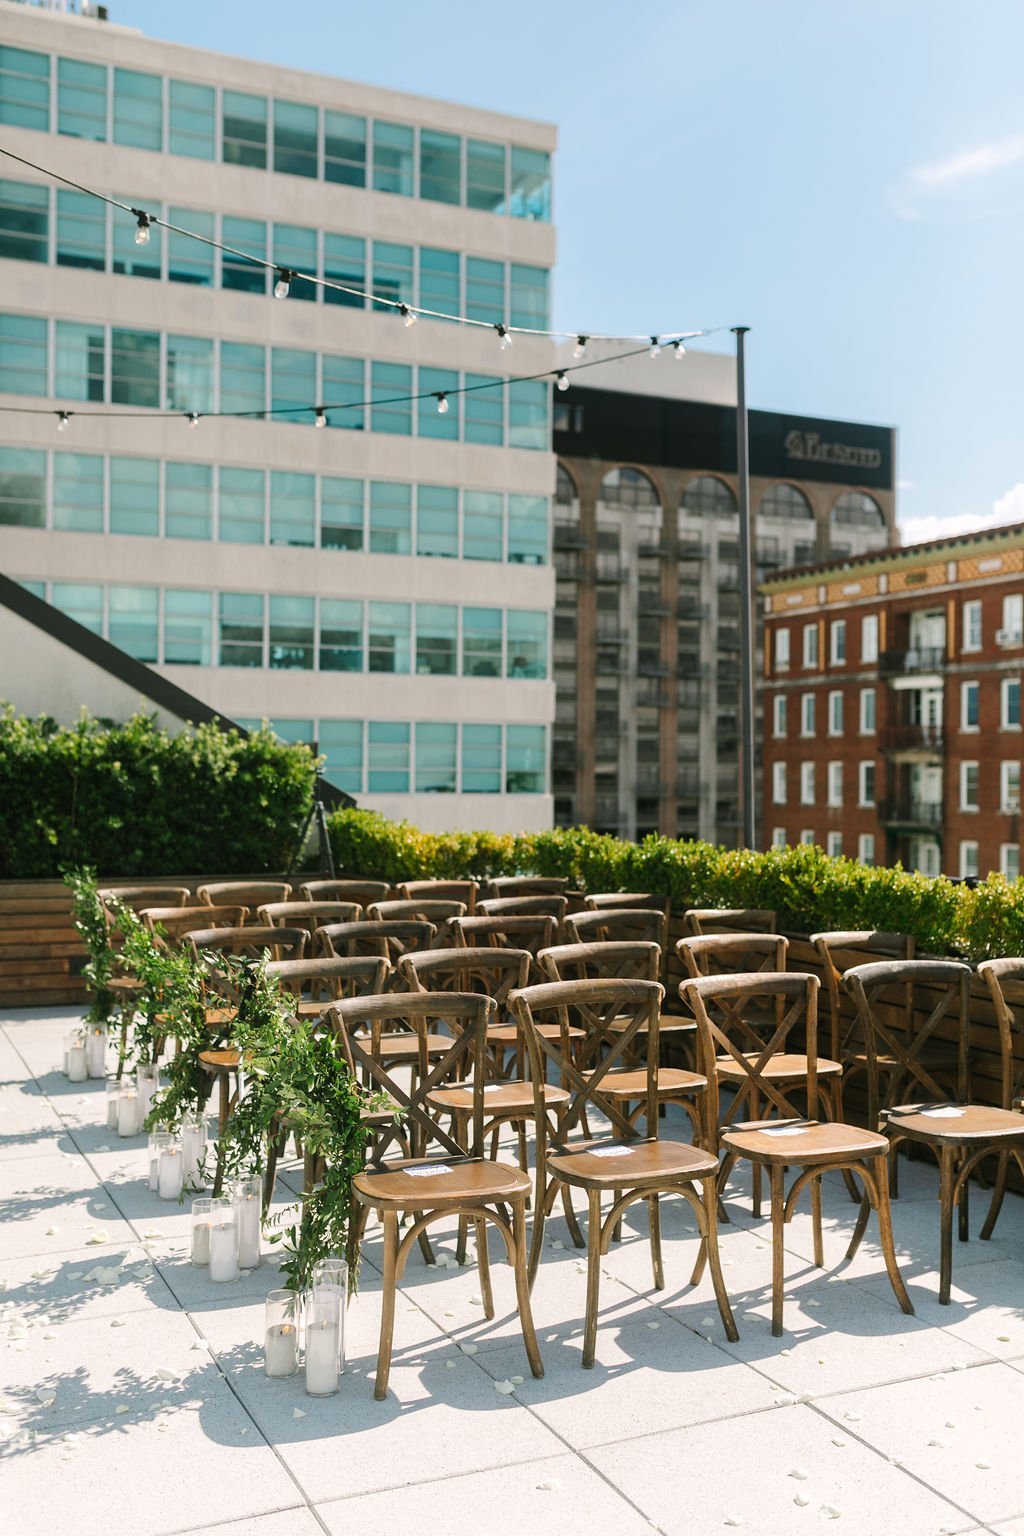 hayley-and-chris-romantic-rooftop-wedding-at-the-perry-lane-in-savannah-ga-featuring-organic-lush-wedding-florals-designed-by-ivory-and-beau-31.jpg